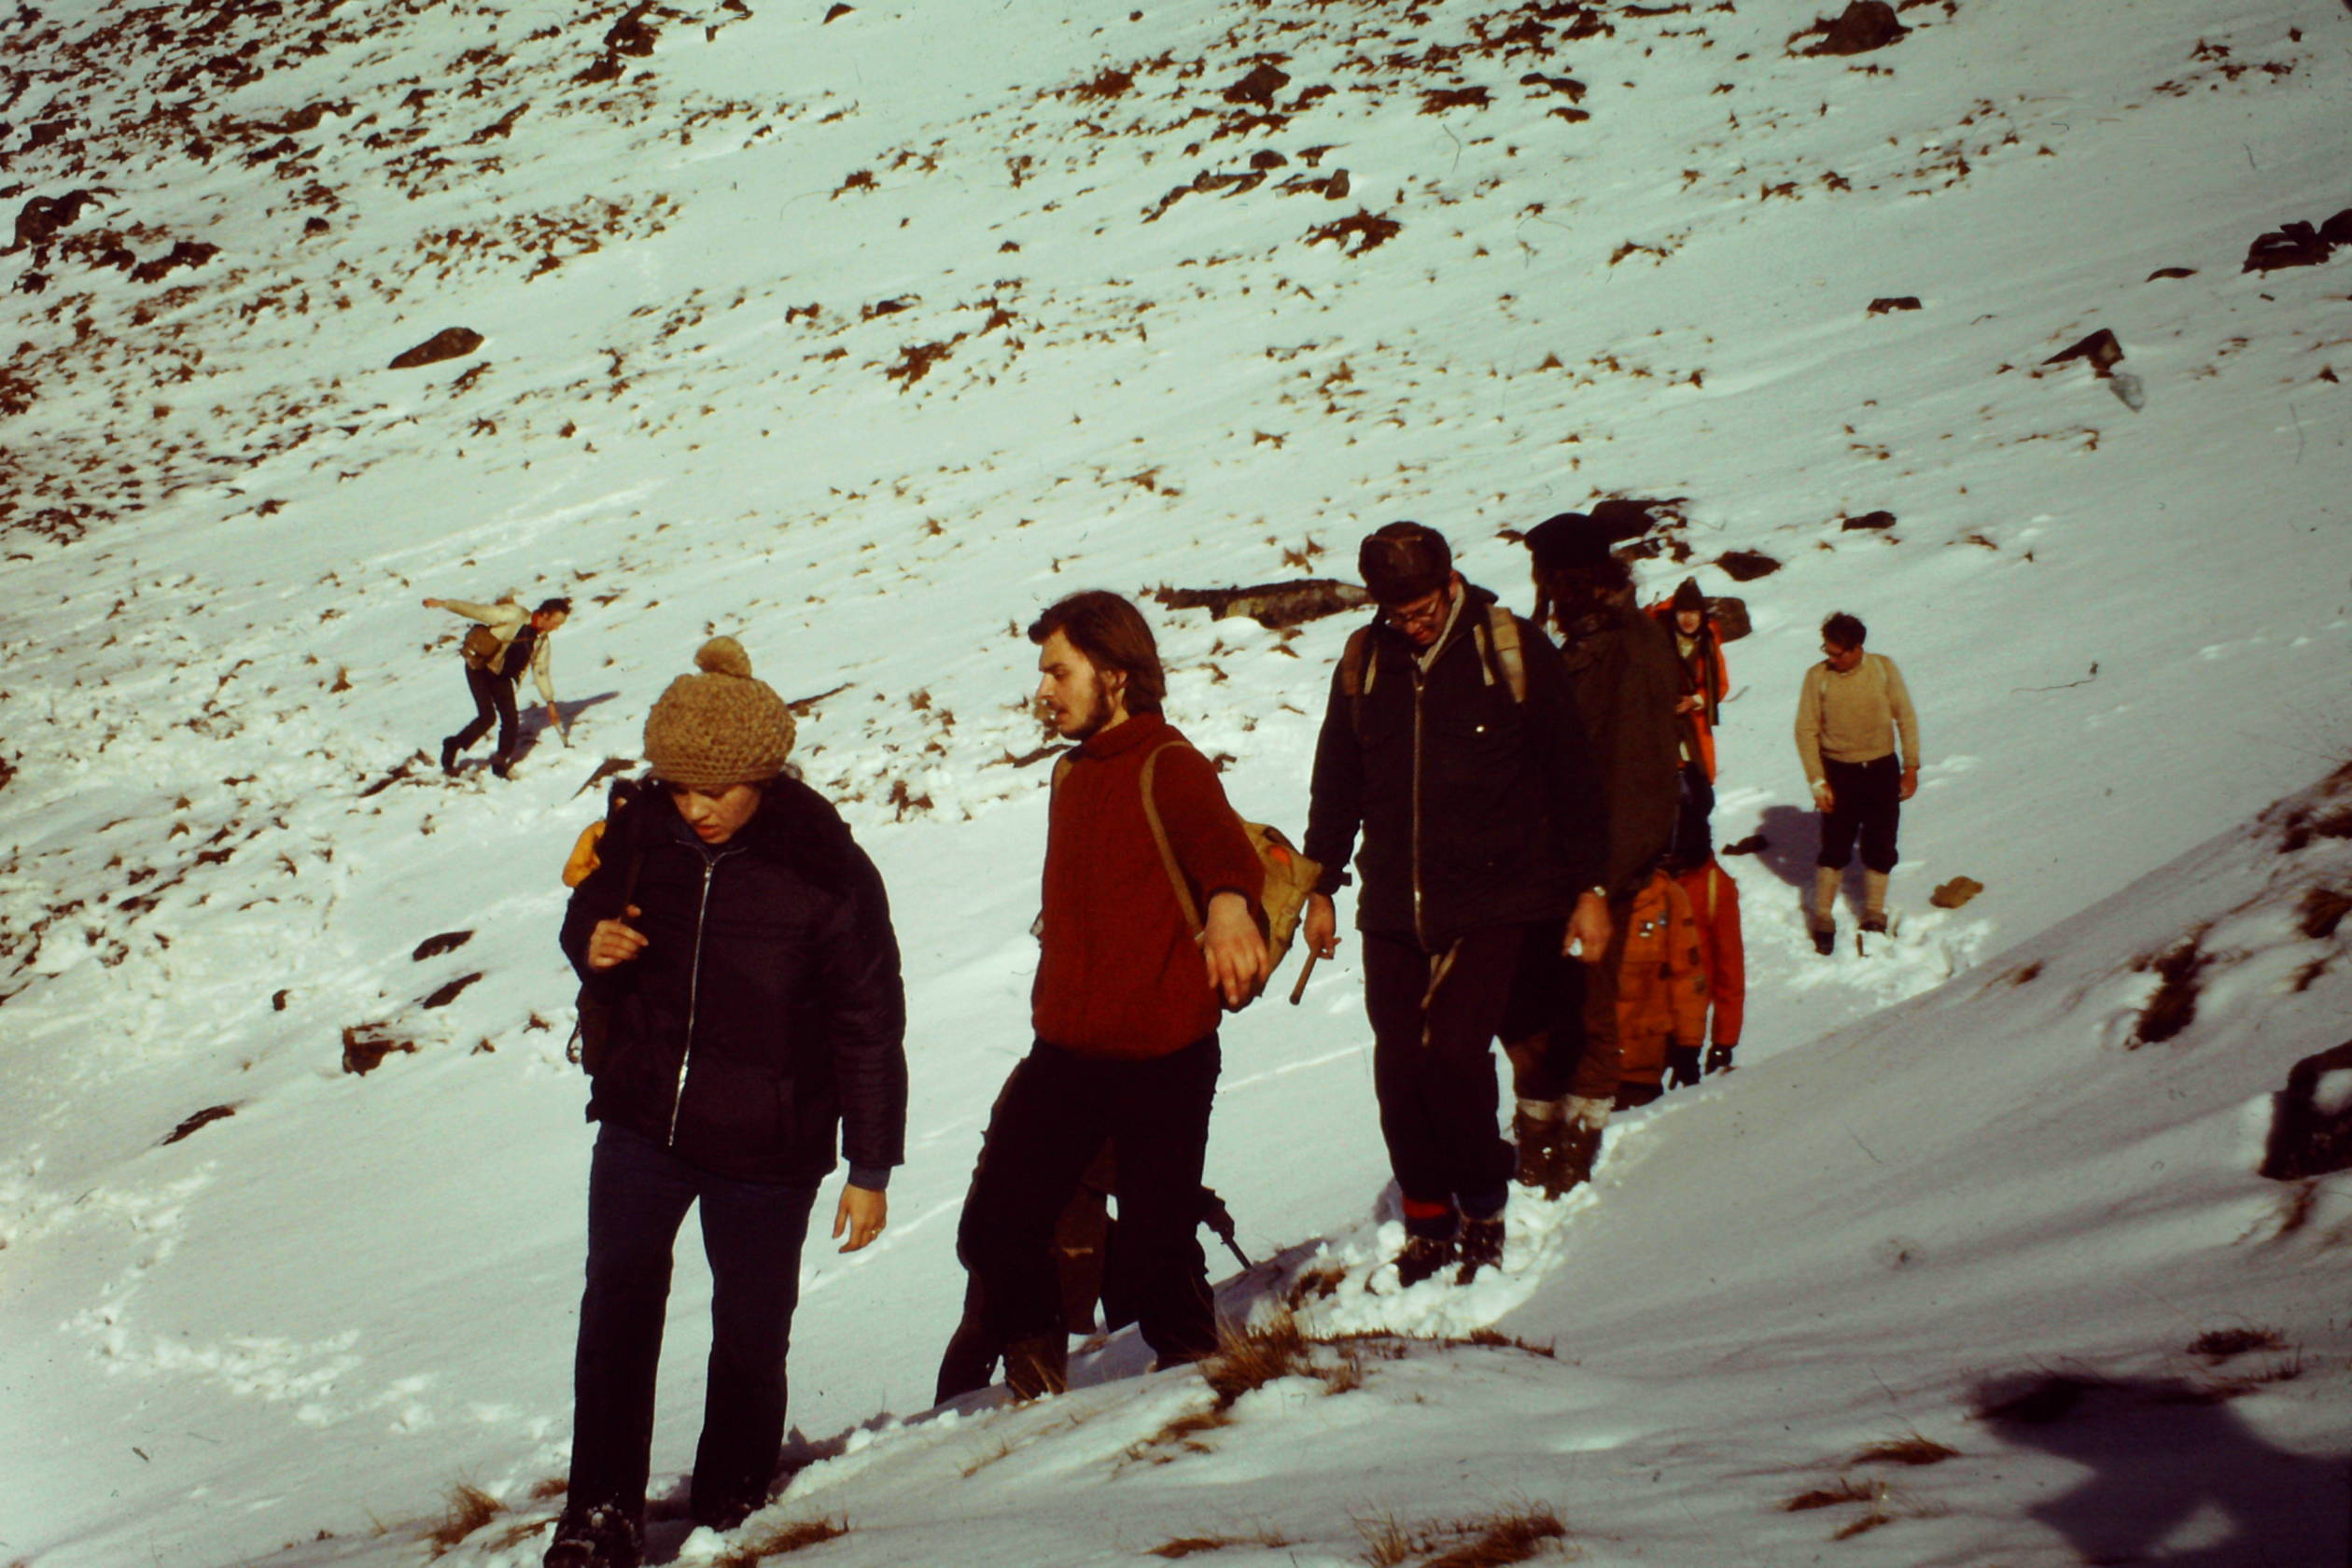 From the Part II Scotland field trip at Easter 1974. Peter Friend is third in the line, Graham Chinner is far right.